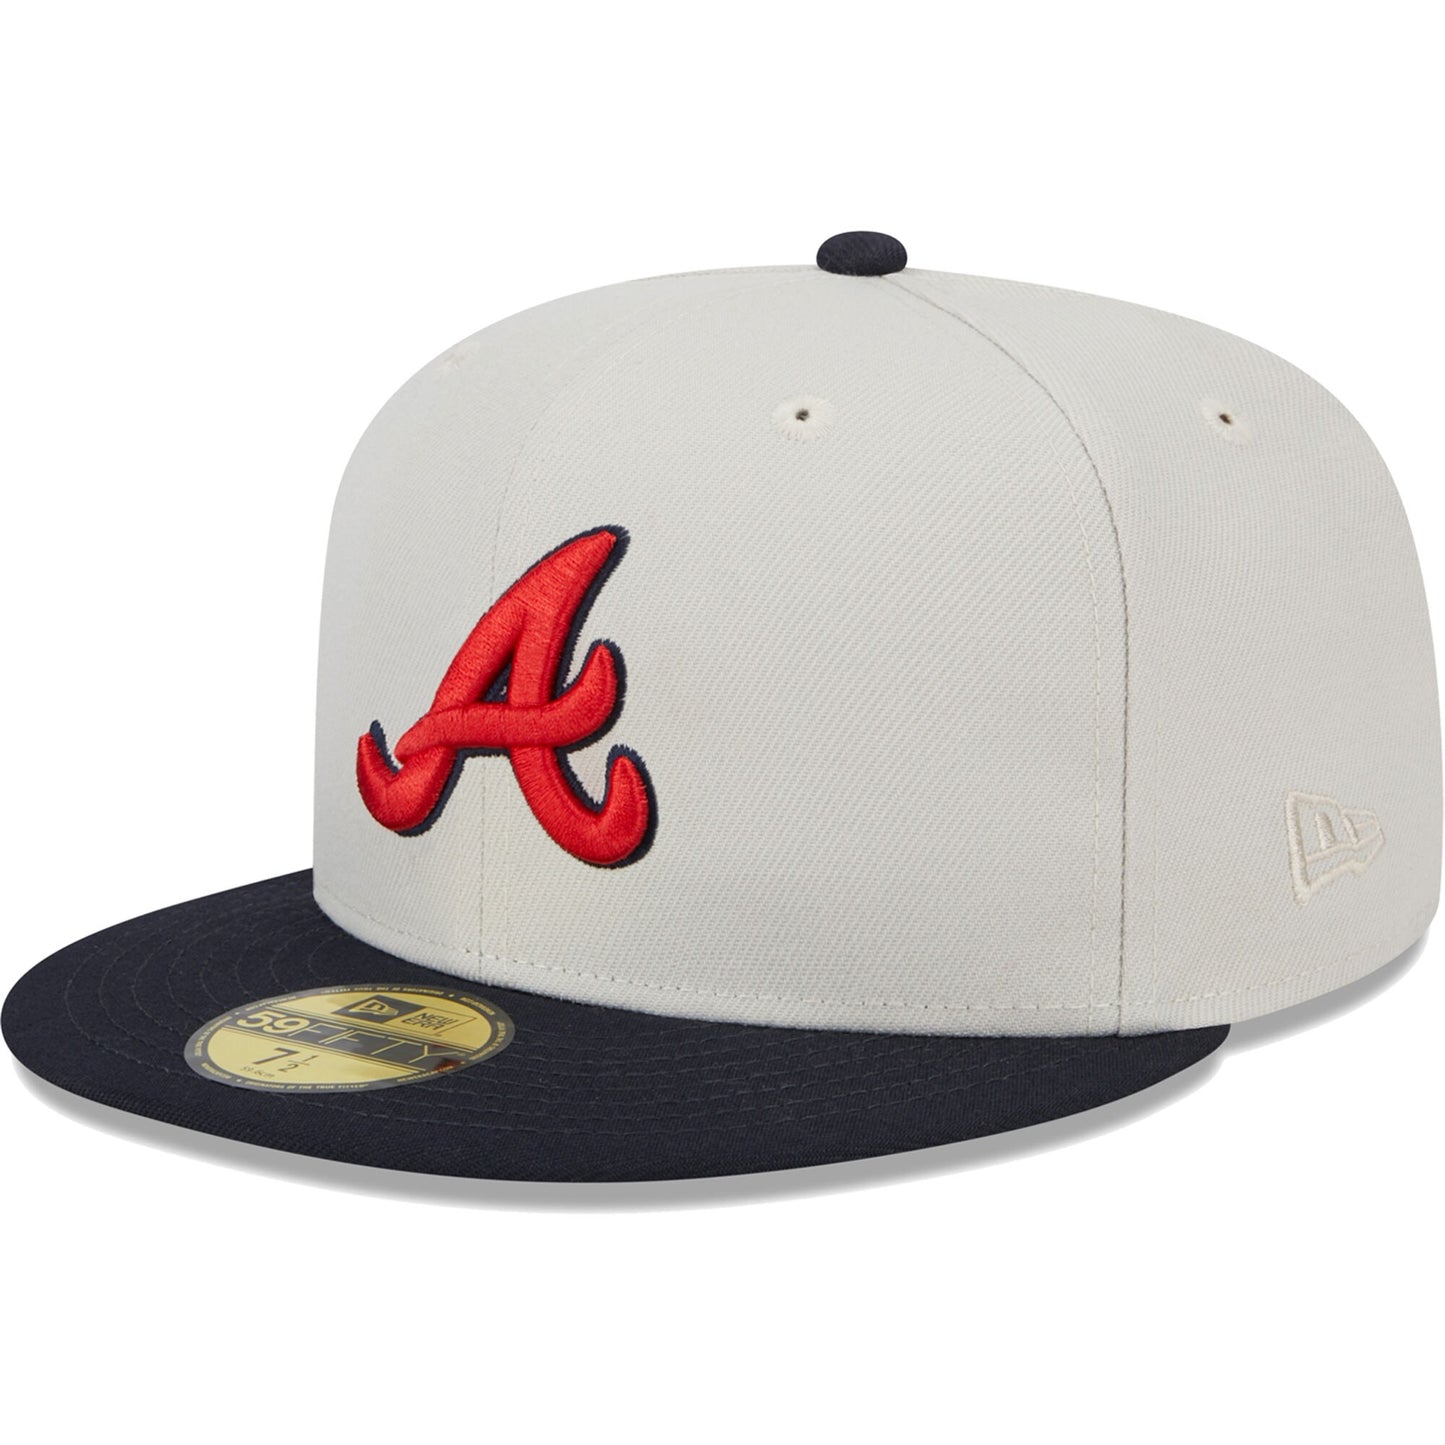 Atlanta Braves New Era World Class Back Patch 59FIFTY Fitted Hat - Gray/Navy